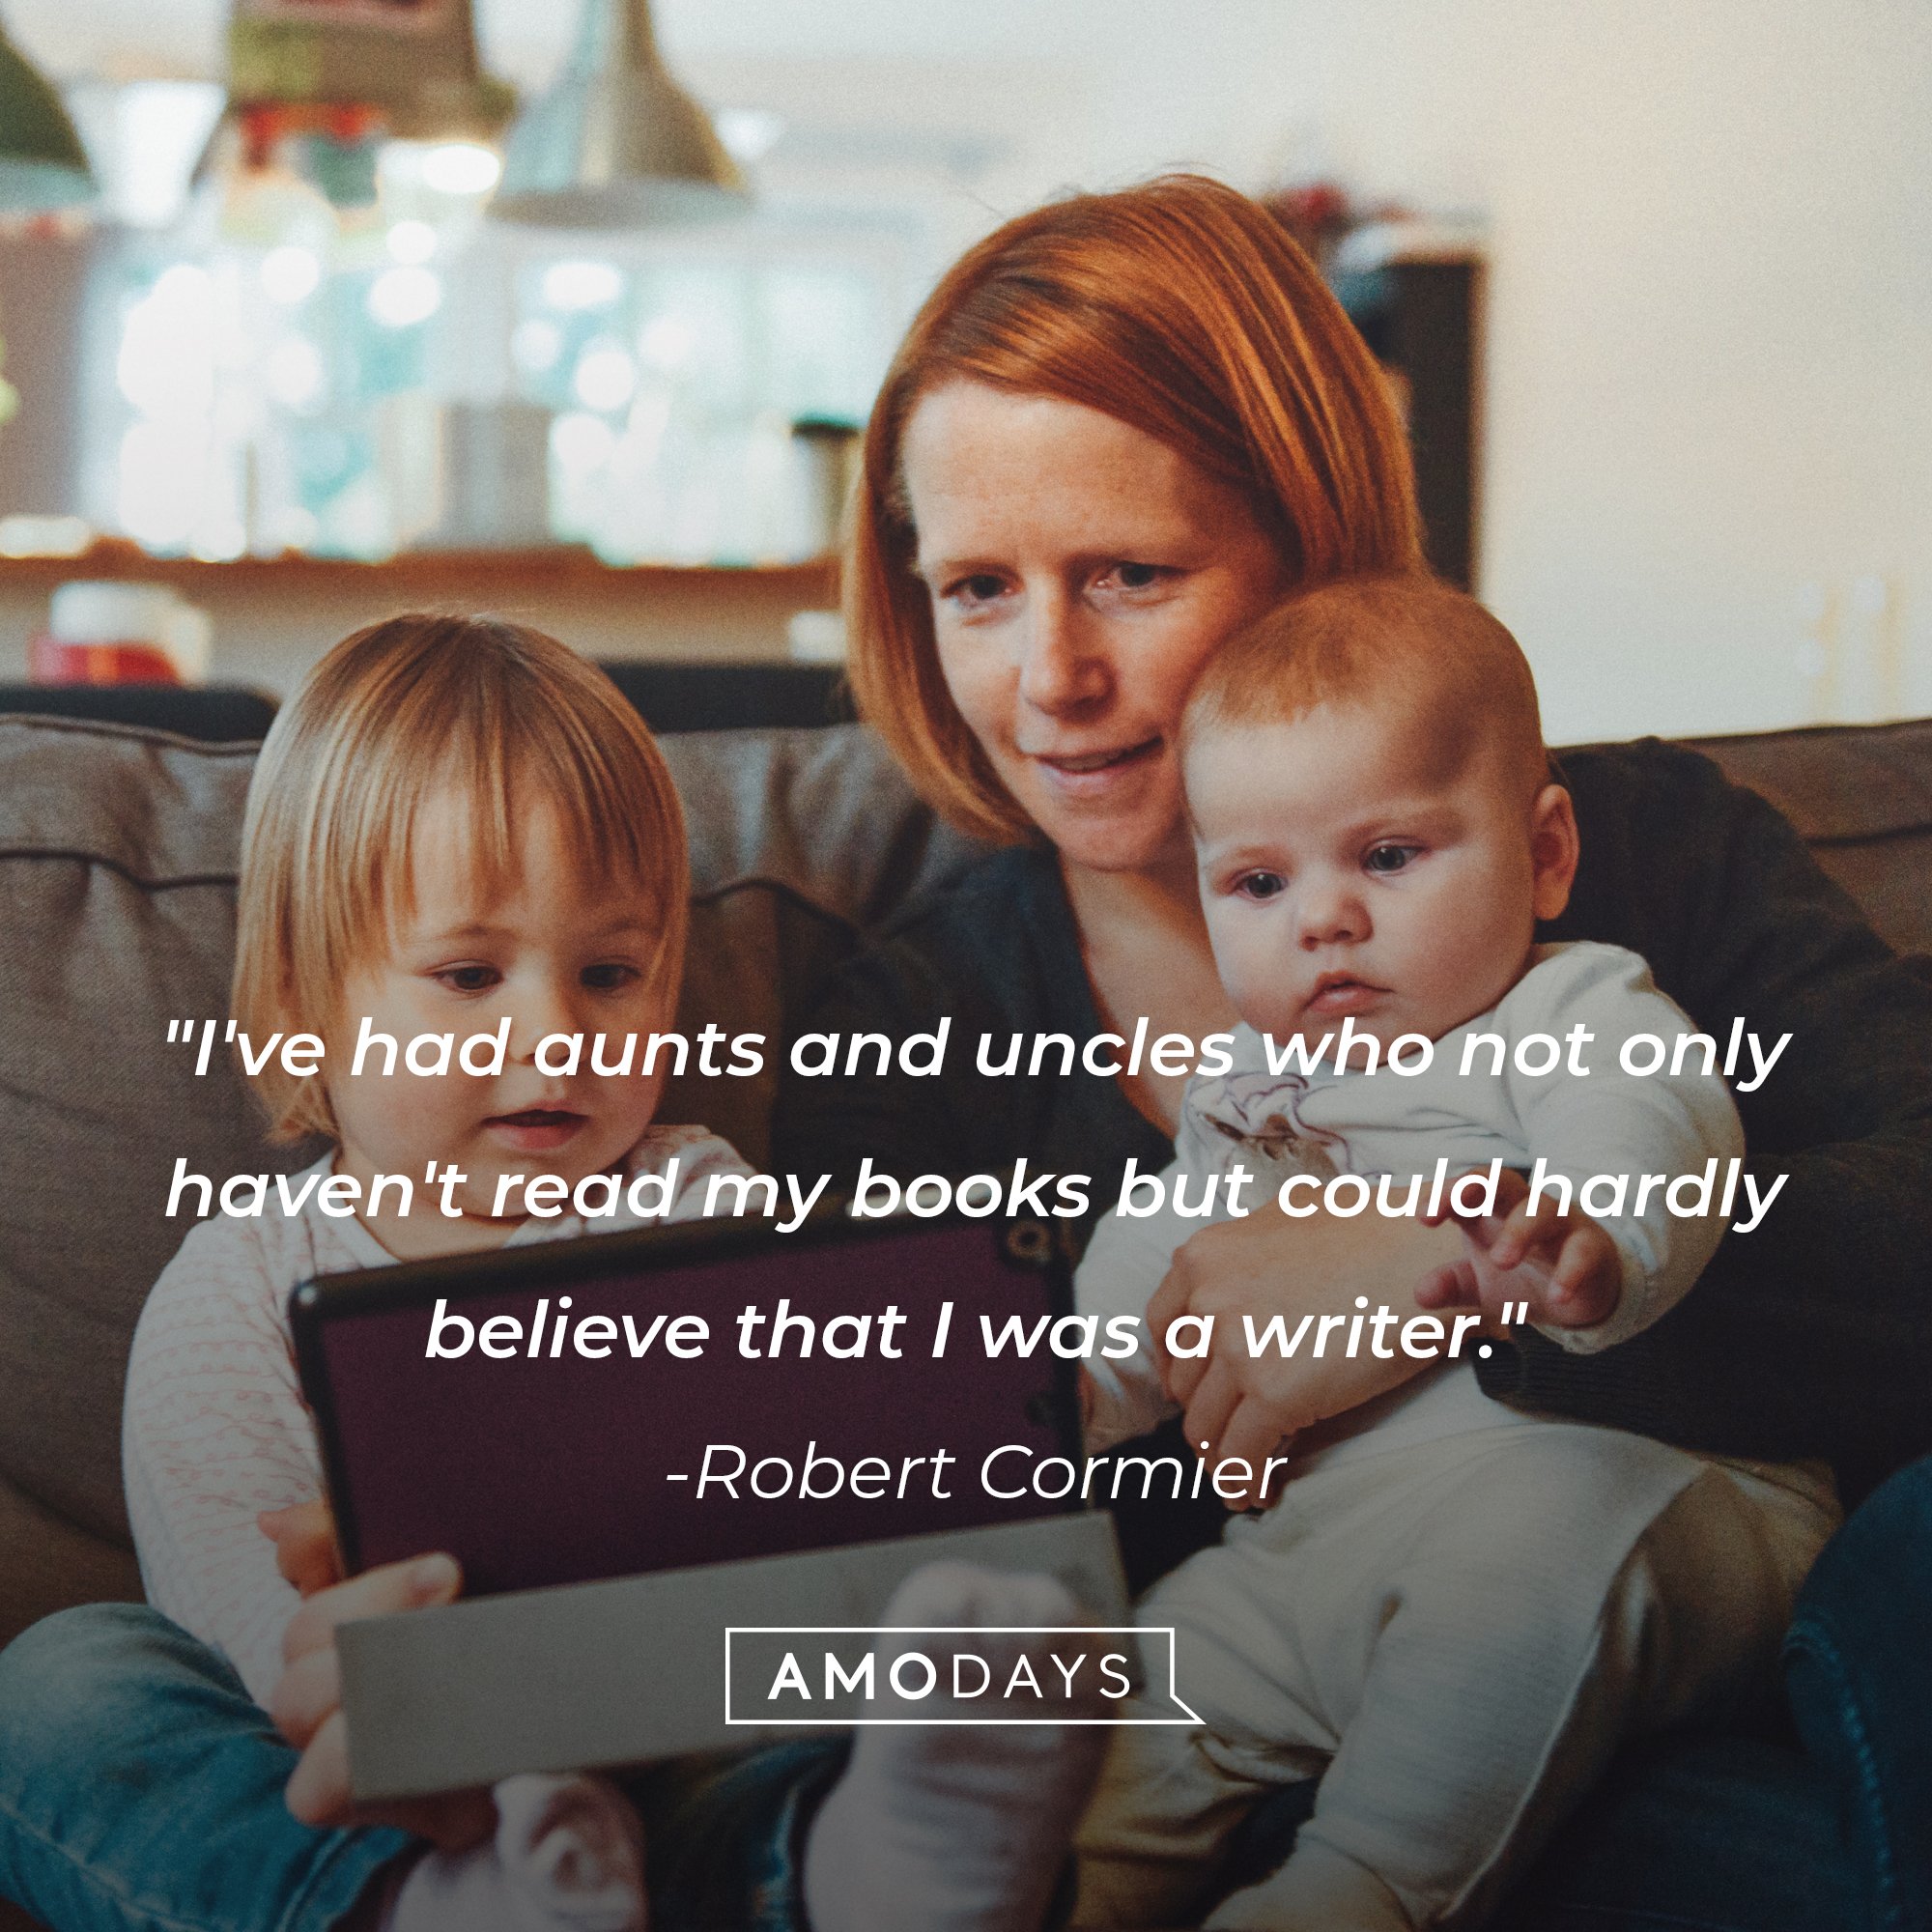 Robert Cormier's quote: "I've had aunts and uncles who not only haven't read my books but could hardly believe that I was a writer." | Image: AmoDays